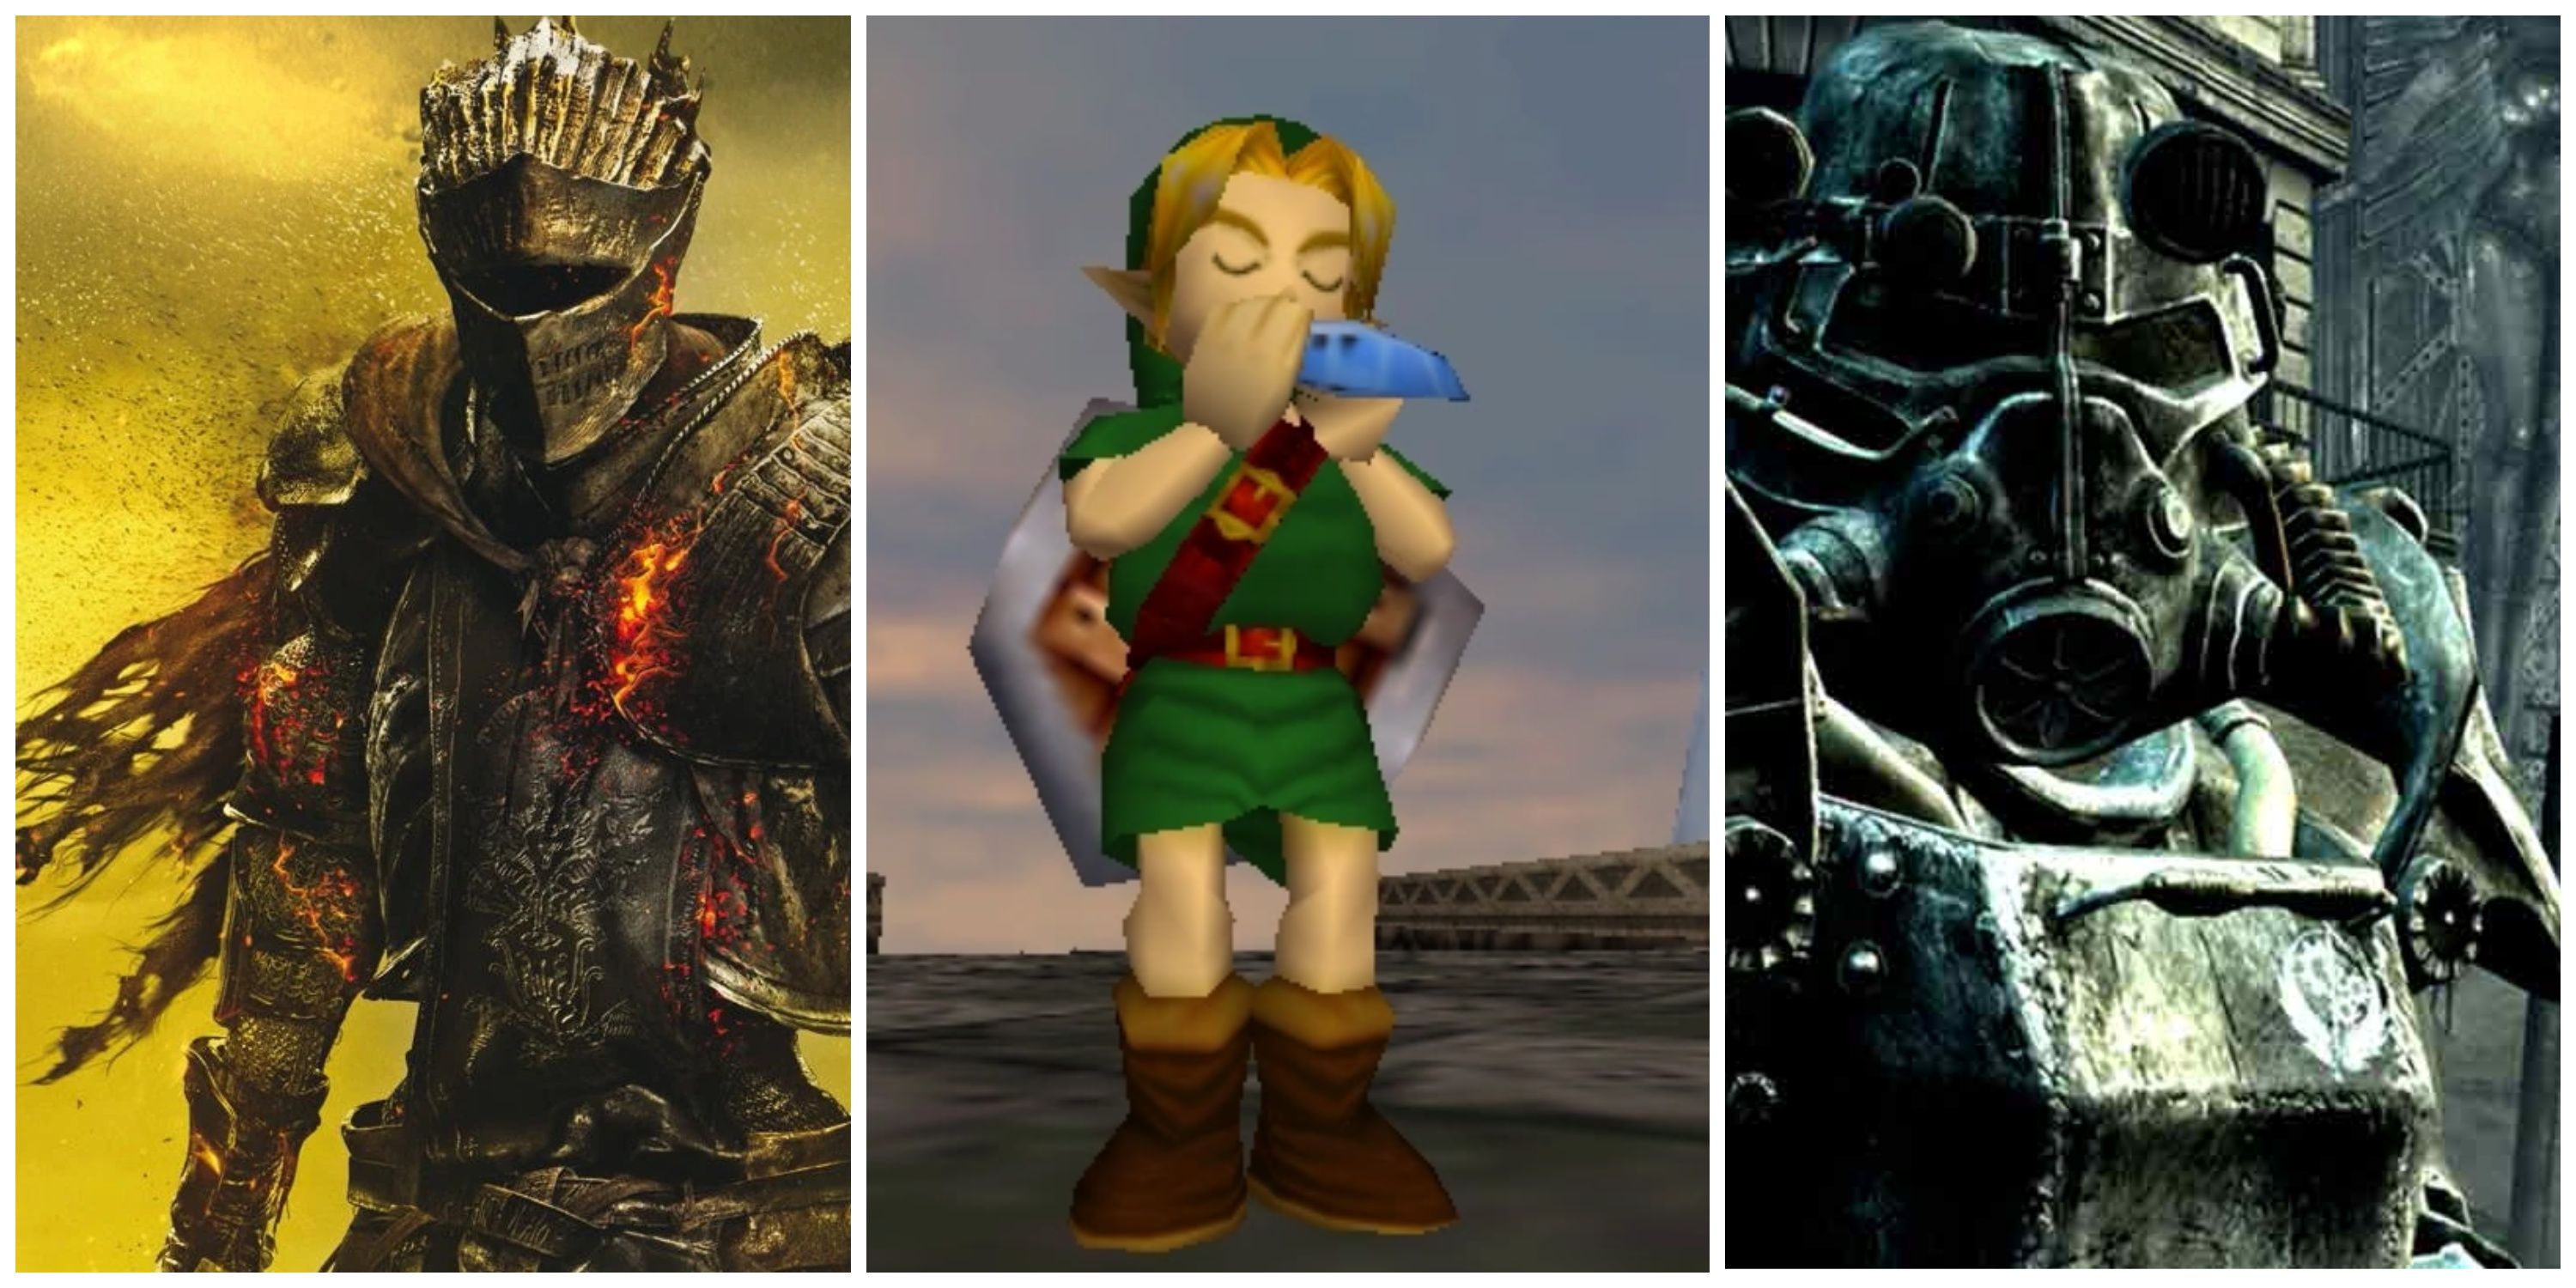 dark souls 3 soul of cinder, ocarina of time link, power armor fallout 3